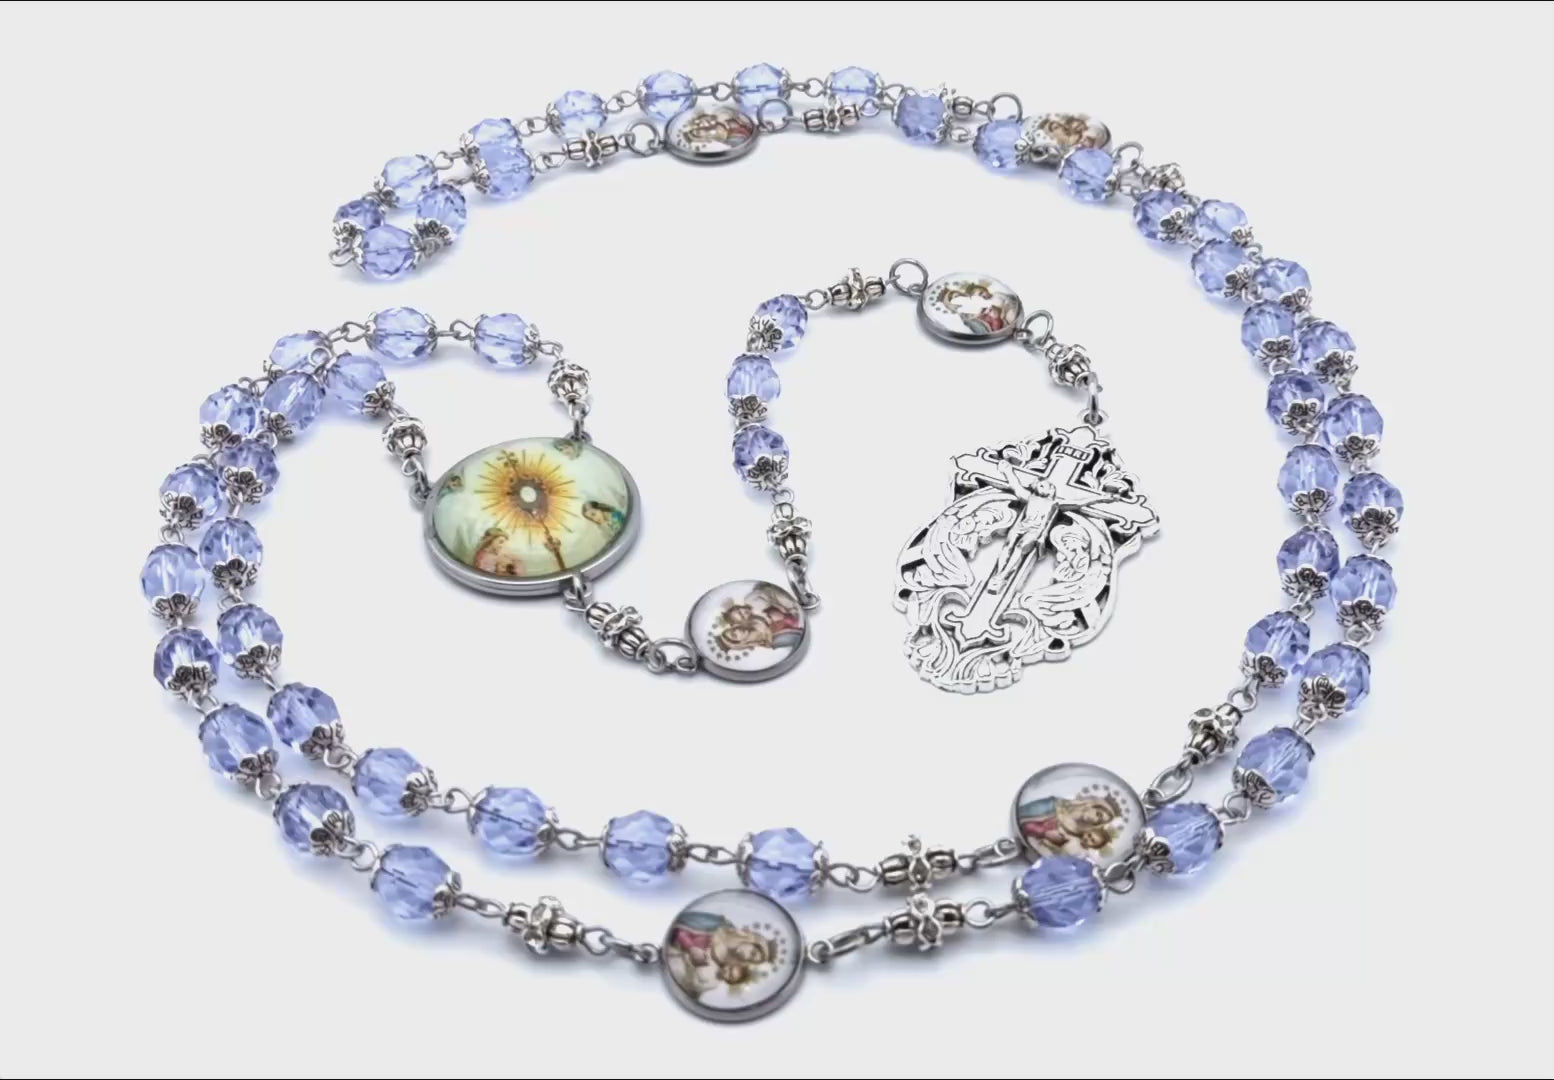 Our Lady of Mount Carmel unique rosary beads with lilac glass faceted beads, stainless steel picture centre medal and crucifix.